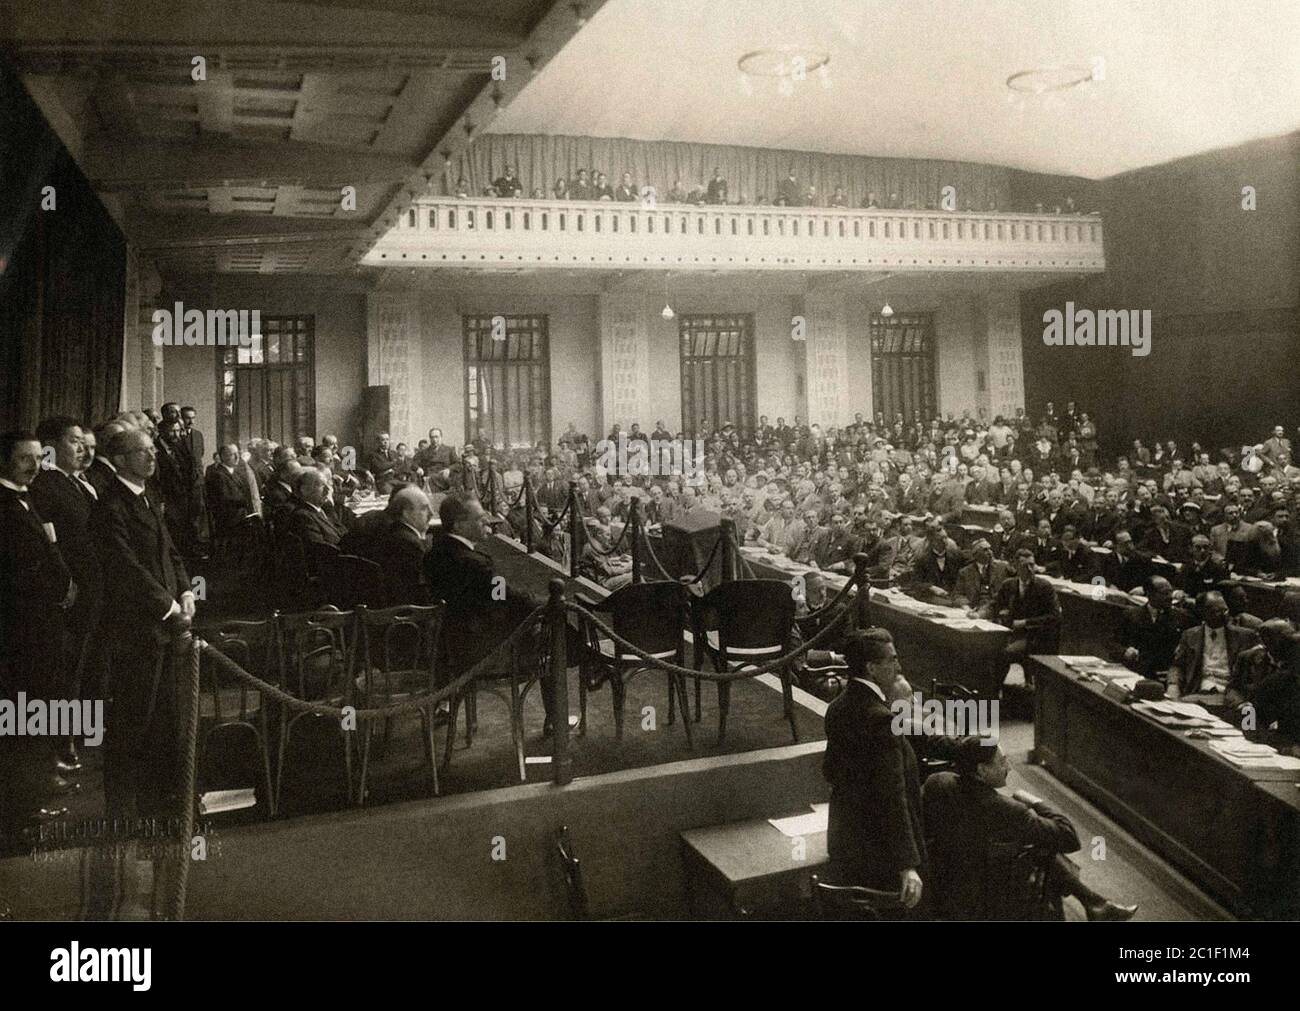 1924: conference of the League of Nations at the Palais des Nations in Geneva, Switzerland. Stock Photo